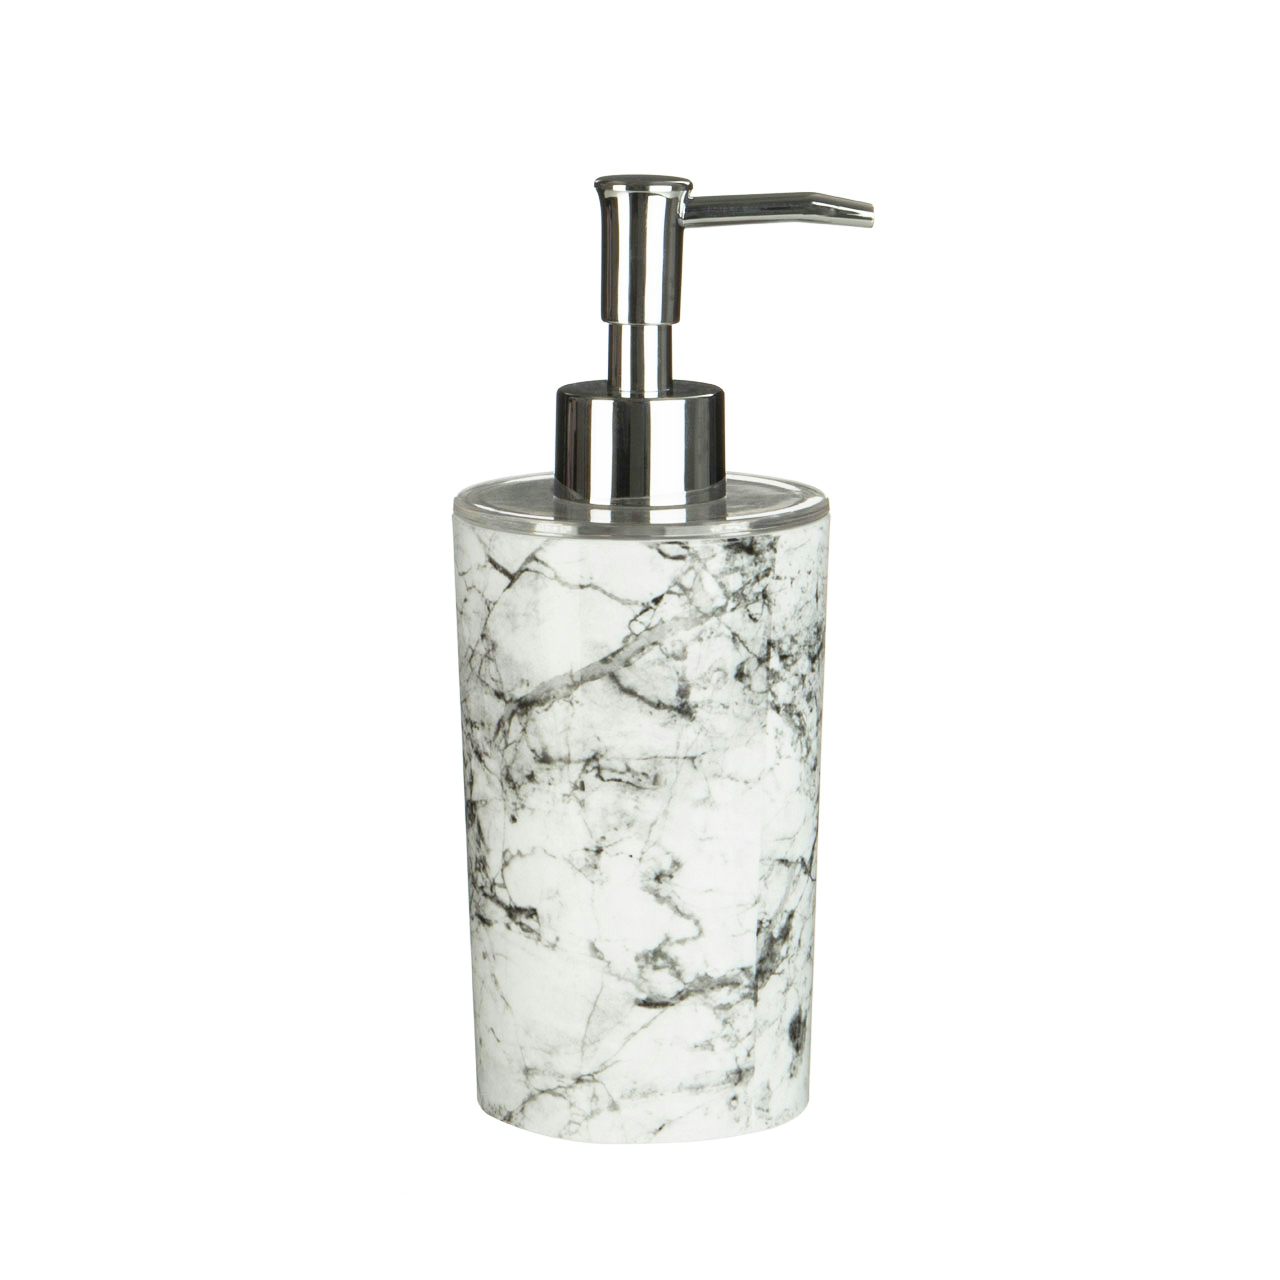 Accents Rome black and white marble effect soap dispenser